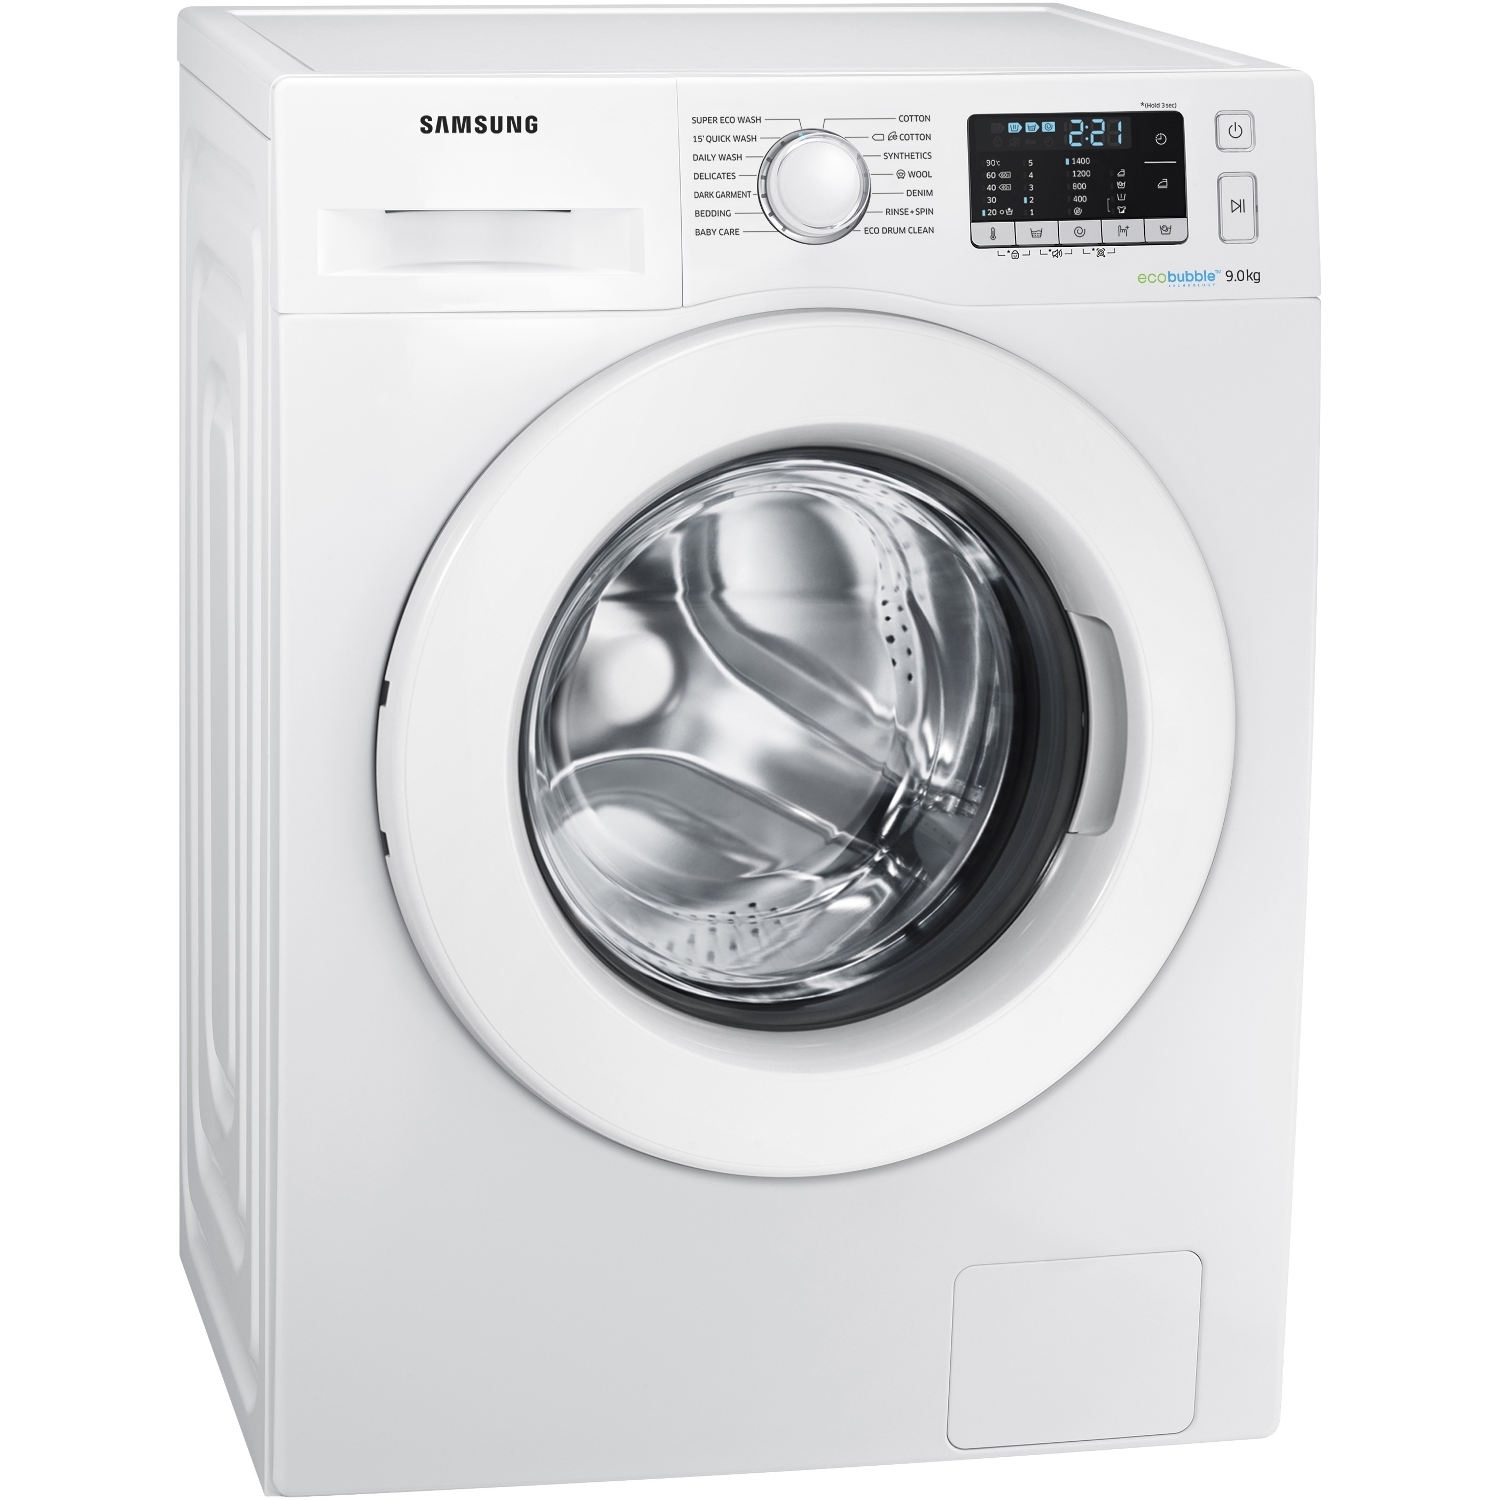 Samsung 9kg 1400 Spin Washing Machine - White - A+++ Rated - 0